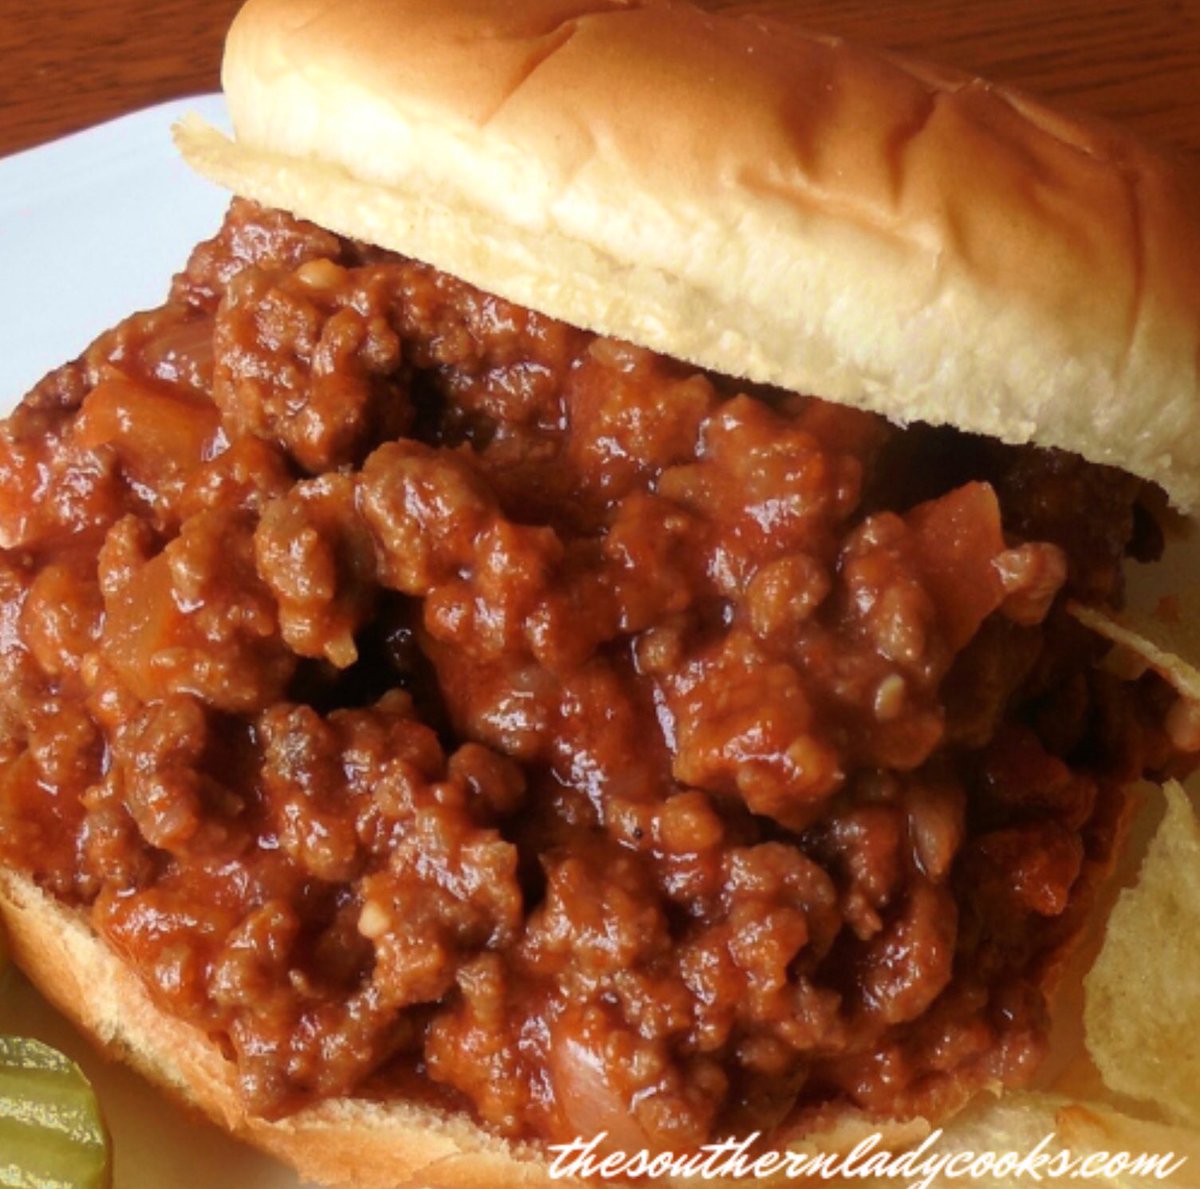 These delicious sloppy joes can be made in the crockpot or on top of the stove. Either way, they make for a great weeknight meal for your family. #beef #sloppyjoes #easy #stovetop #crockpot #weeknight #meal #family #recipe ➡️ thesouthernladycooks.com/sloppy-joes-cr…